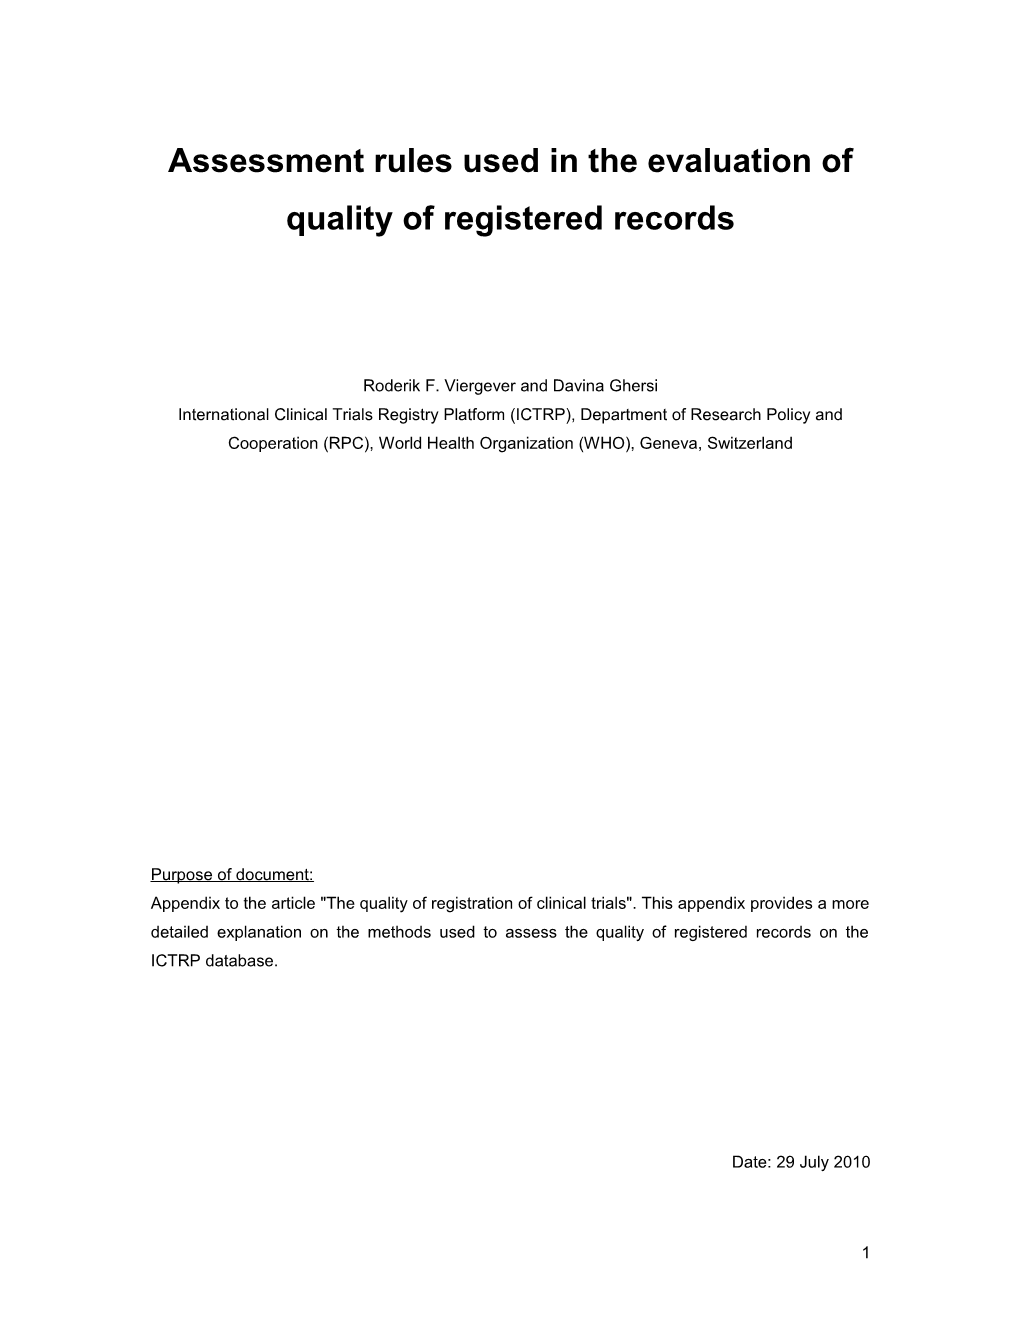 Assessment Rules Used in the Evaluation of Quality of Registered Records